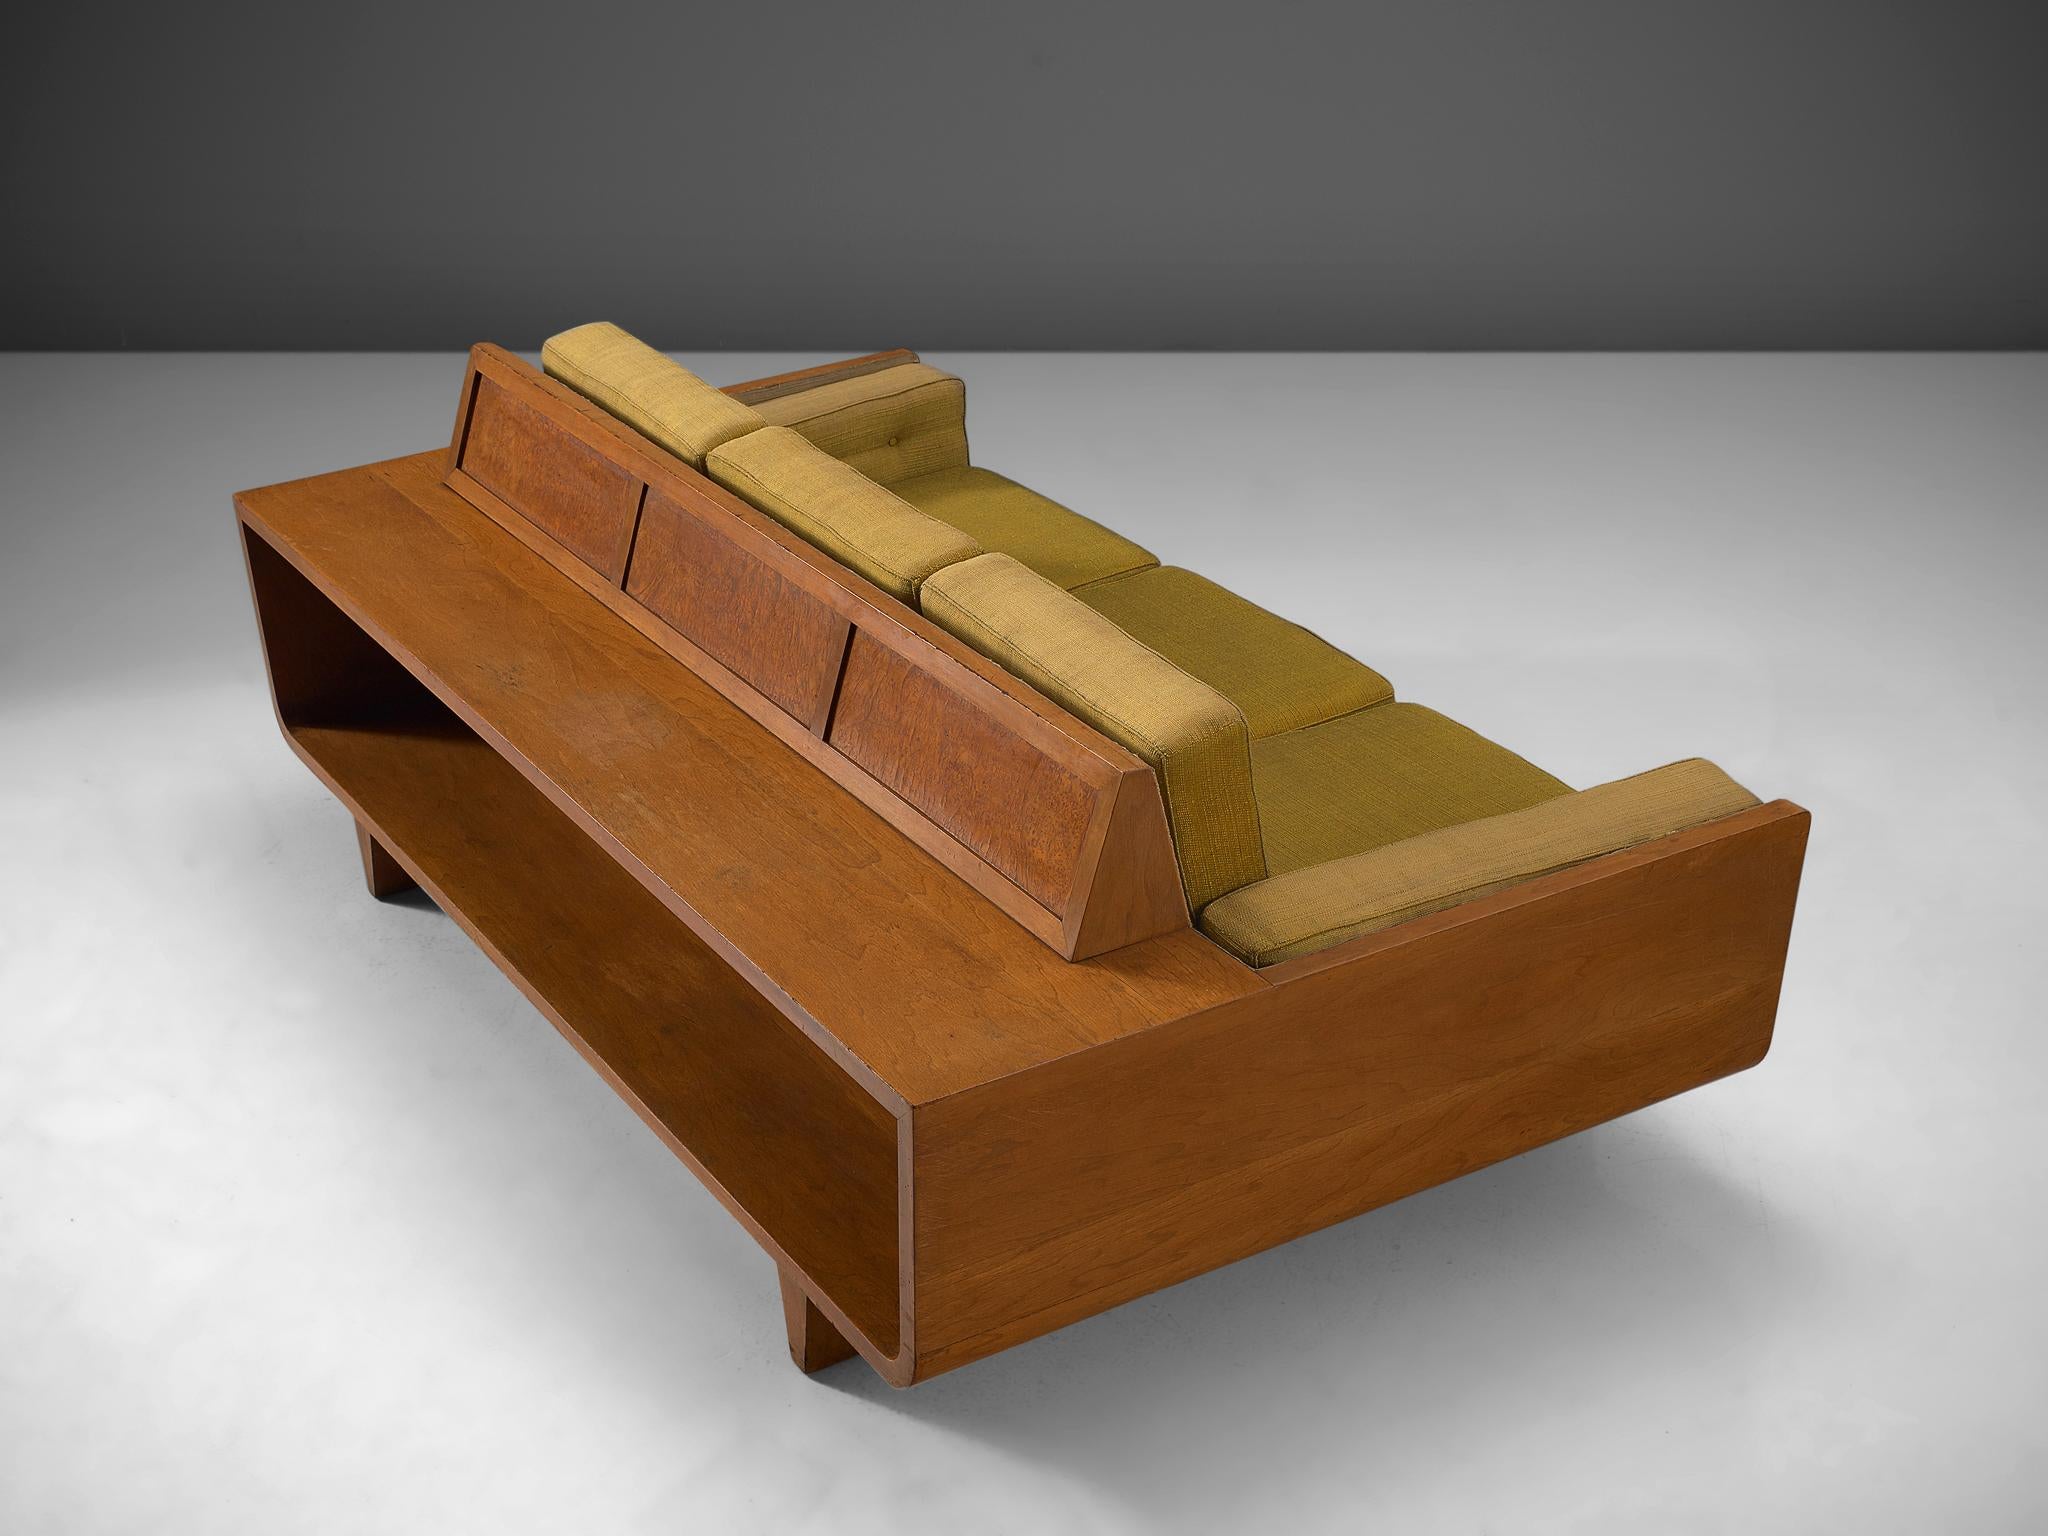 Sofa, walnut wood with green fabric, Italy, circa 1950.

This sculptural sofa is executed with walnut and has several removable cushions that are covered in a green fabric. The frame of the sofa is geometric and has pyramid legs that work well